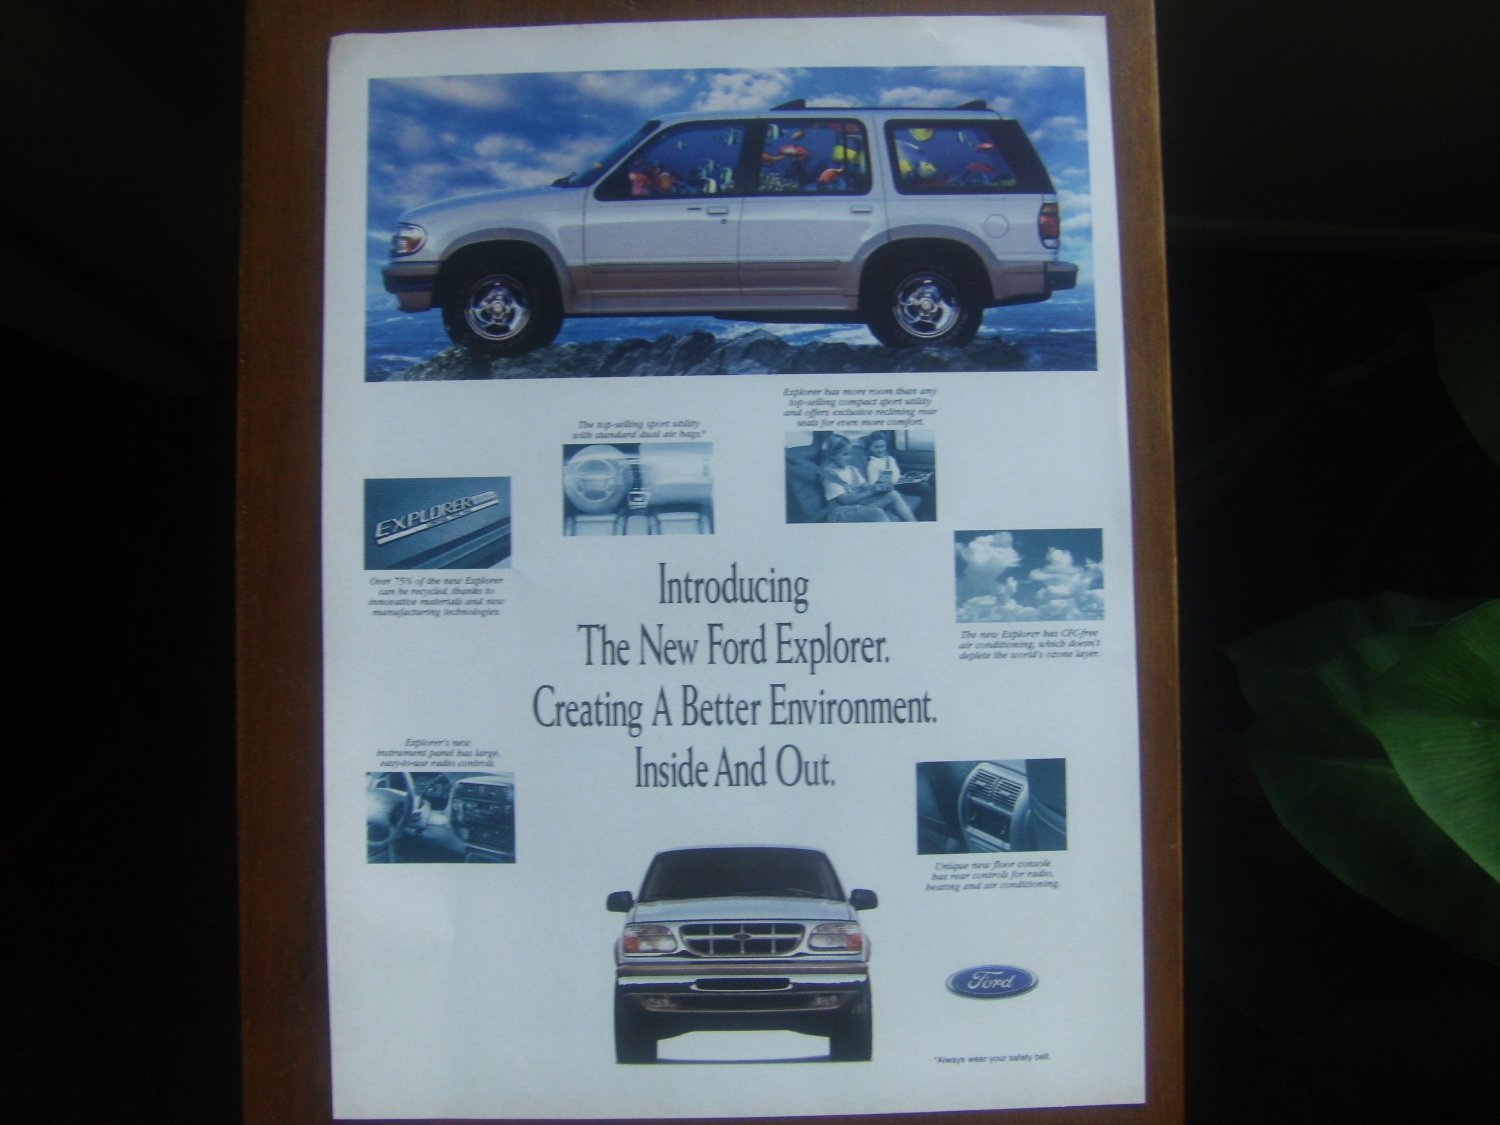 Ford explorer ads in magazines